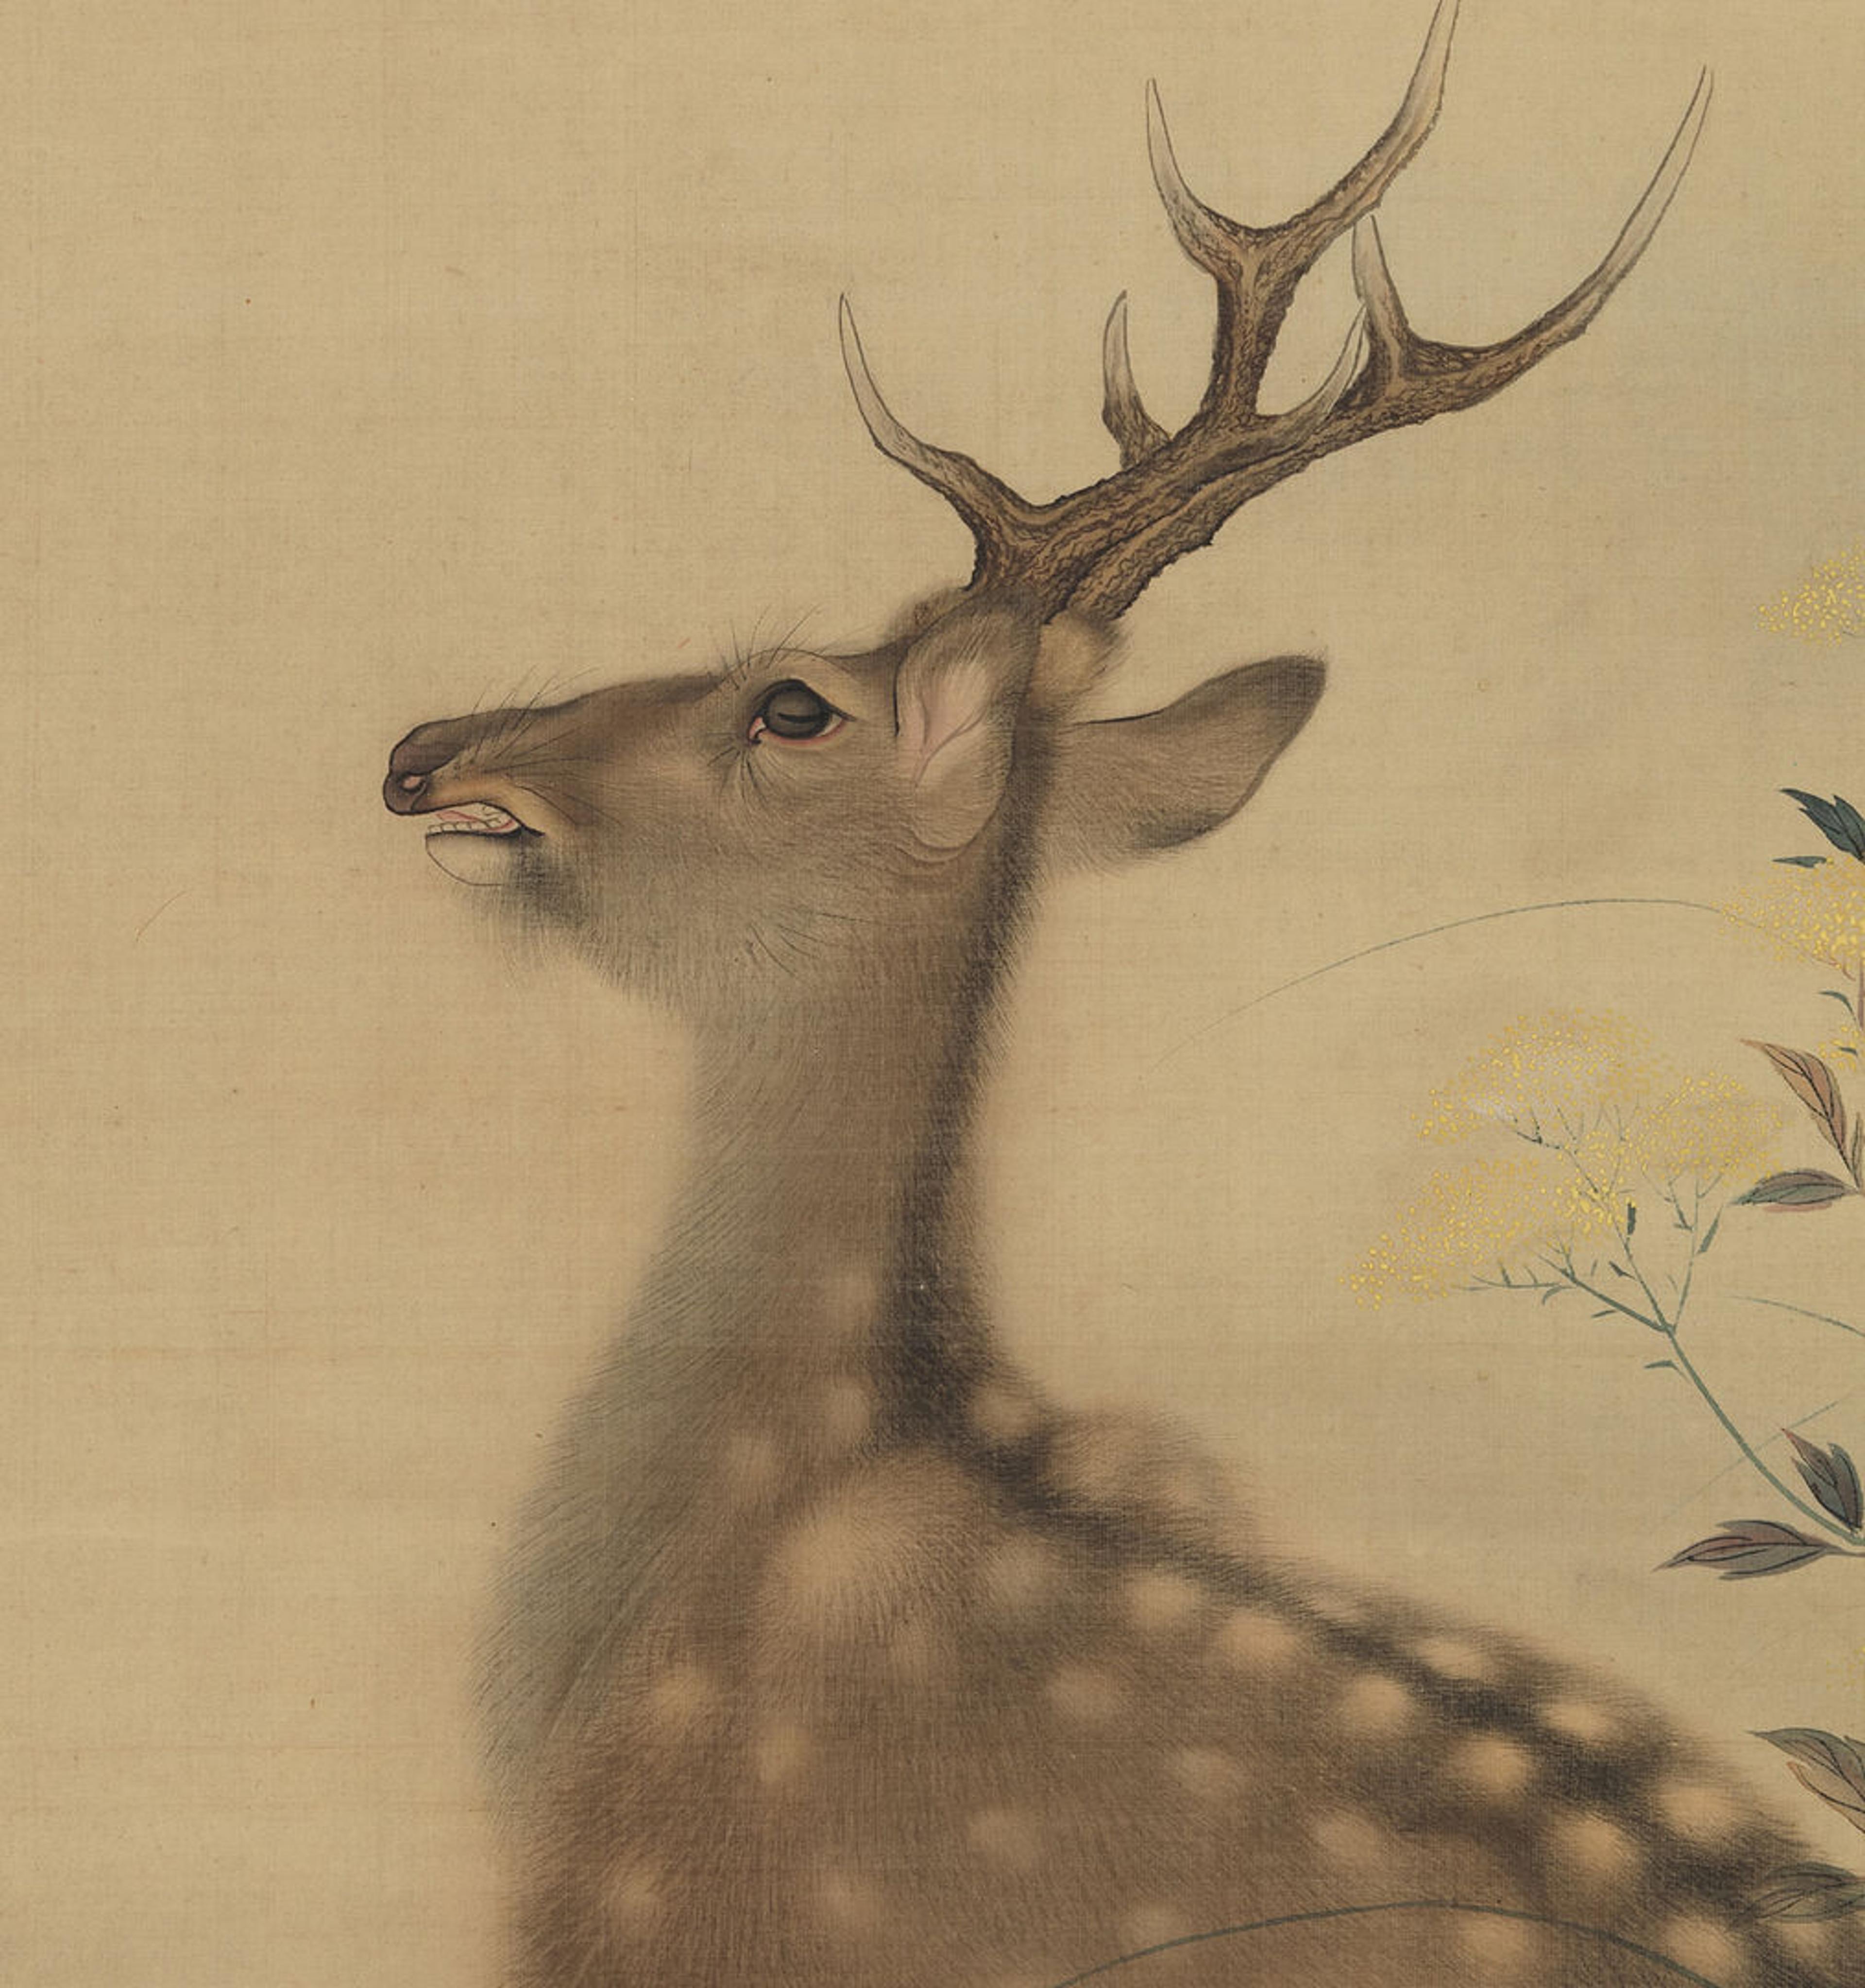 Detail of painting showing stag amidst autumn flowers